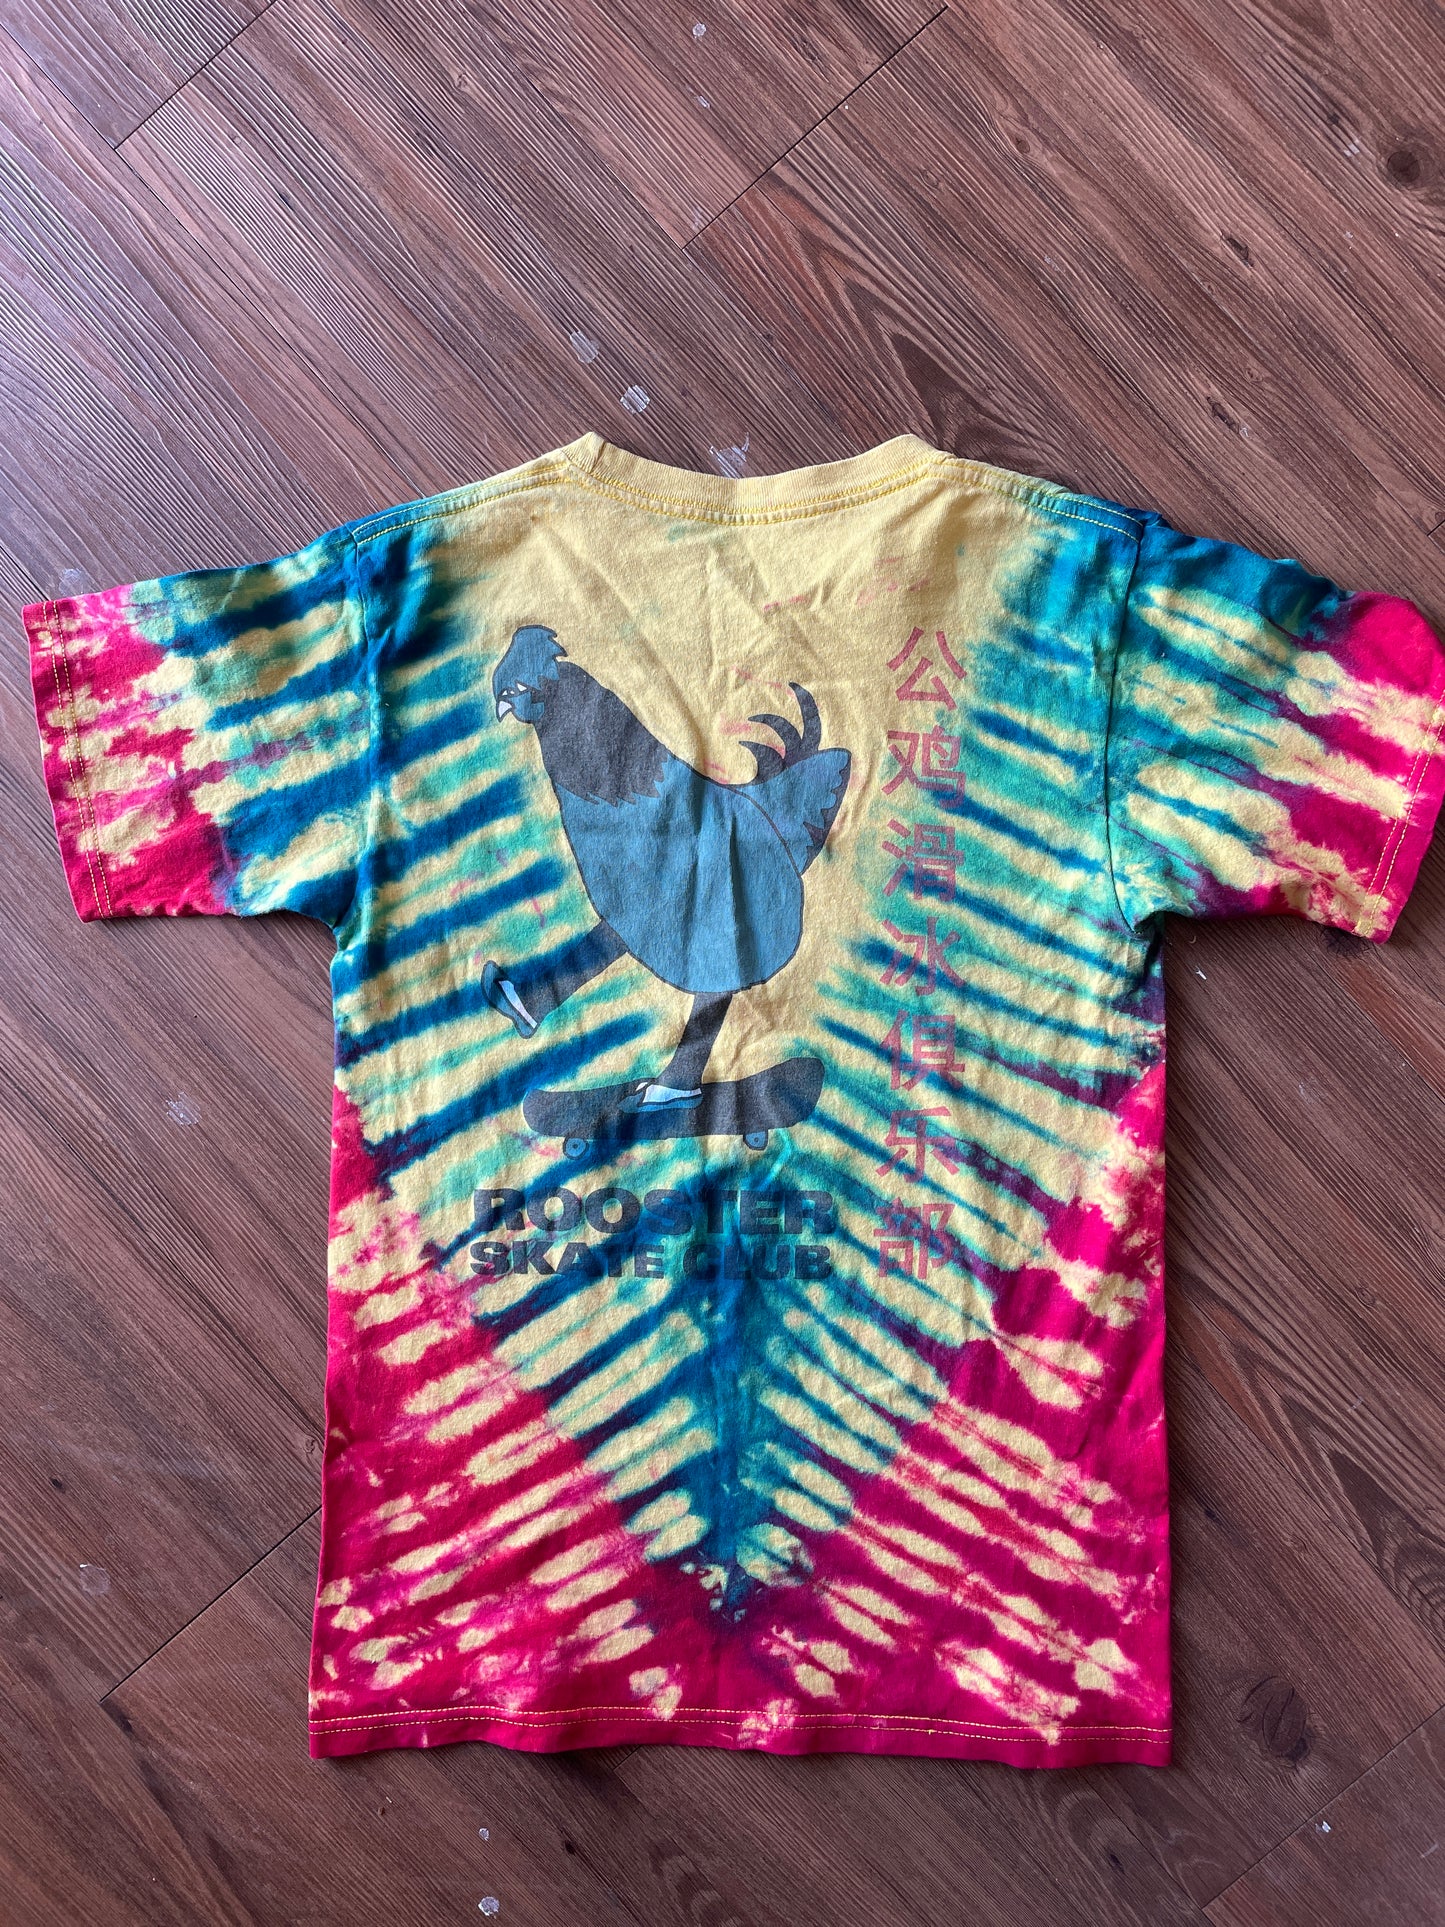 SMALL Men’s Rooster Skate Club Tie Dye T-Shirt | Yellow, Red, and Blue Skateboarding Tie Dye Short Sleeve